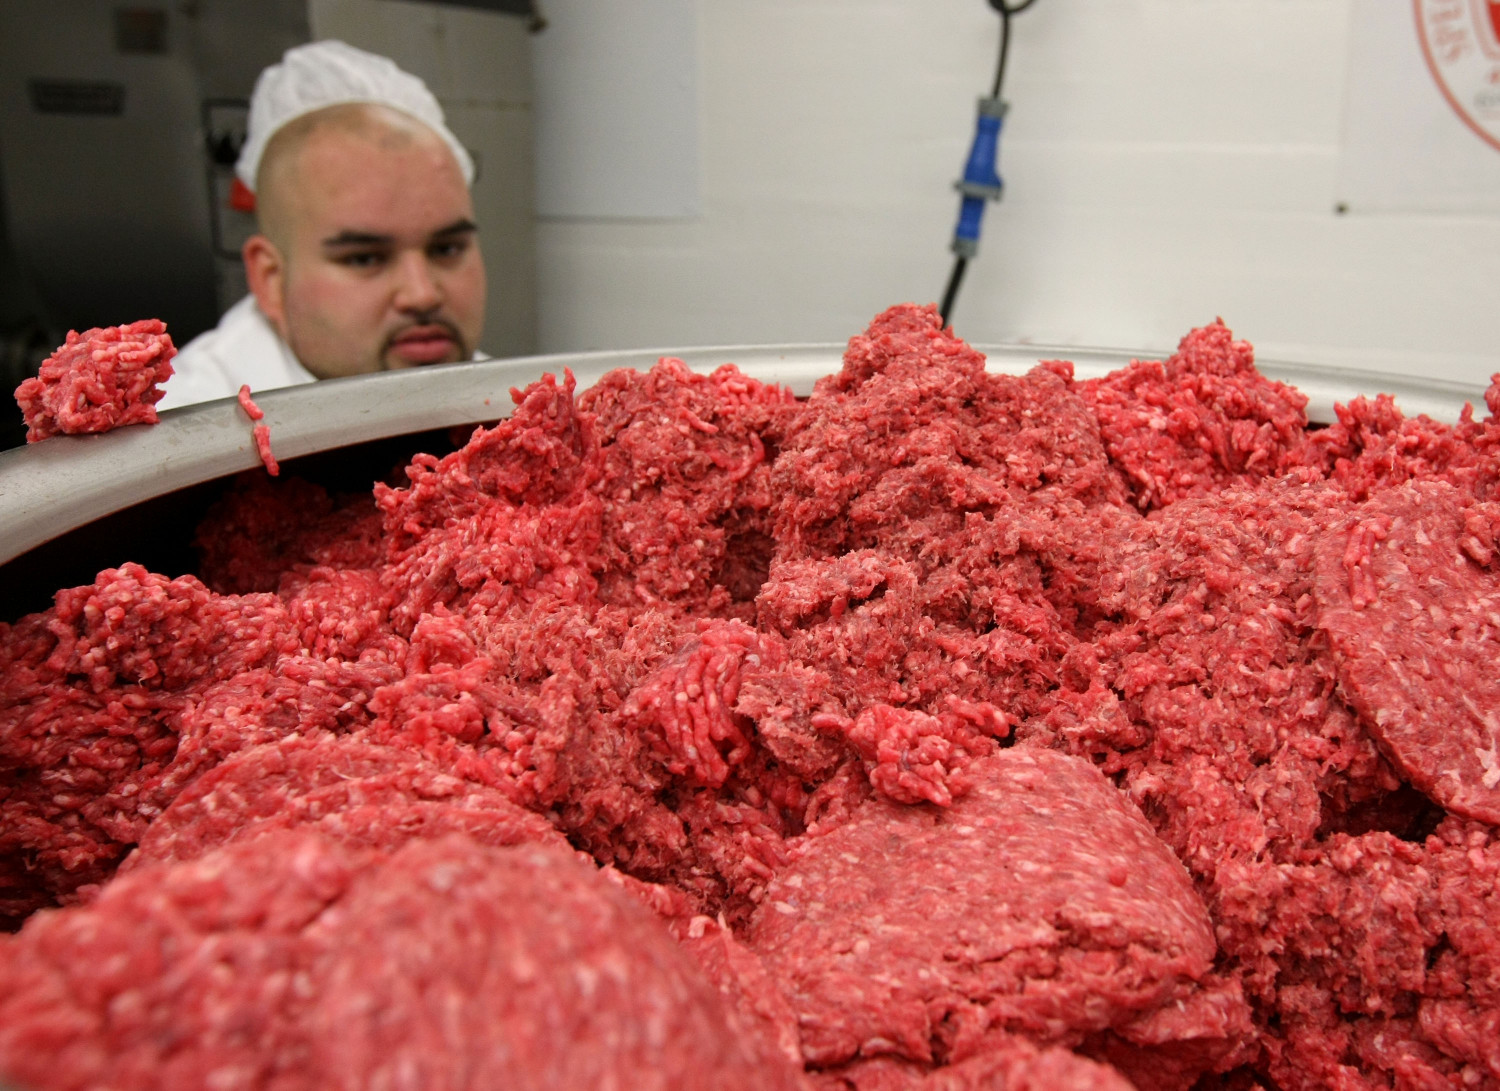 E. Coli Outbreak From Tainted Ground Beef Expands